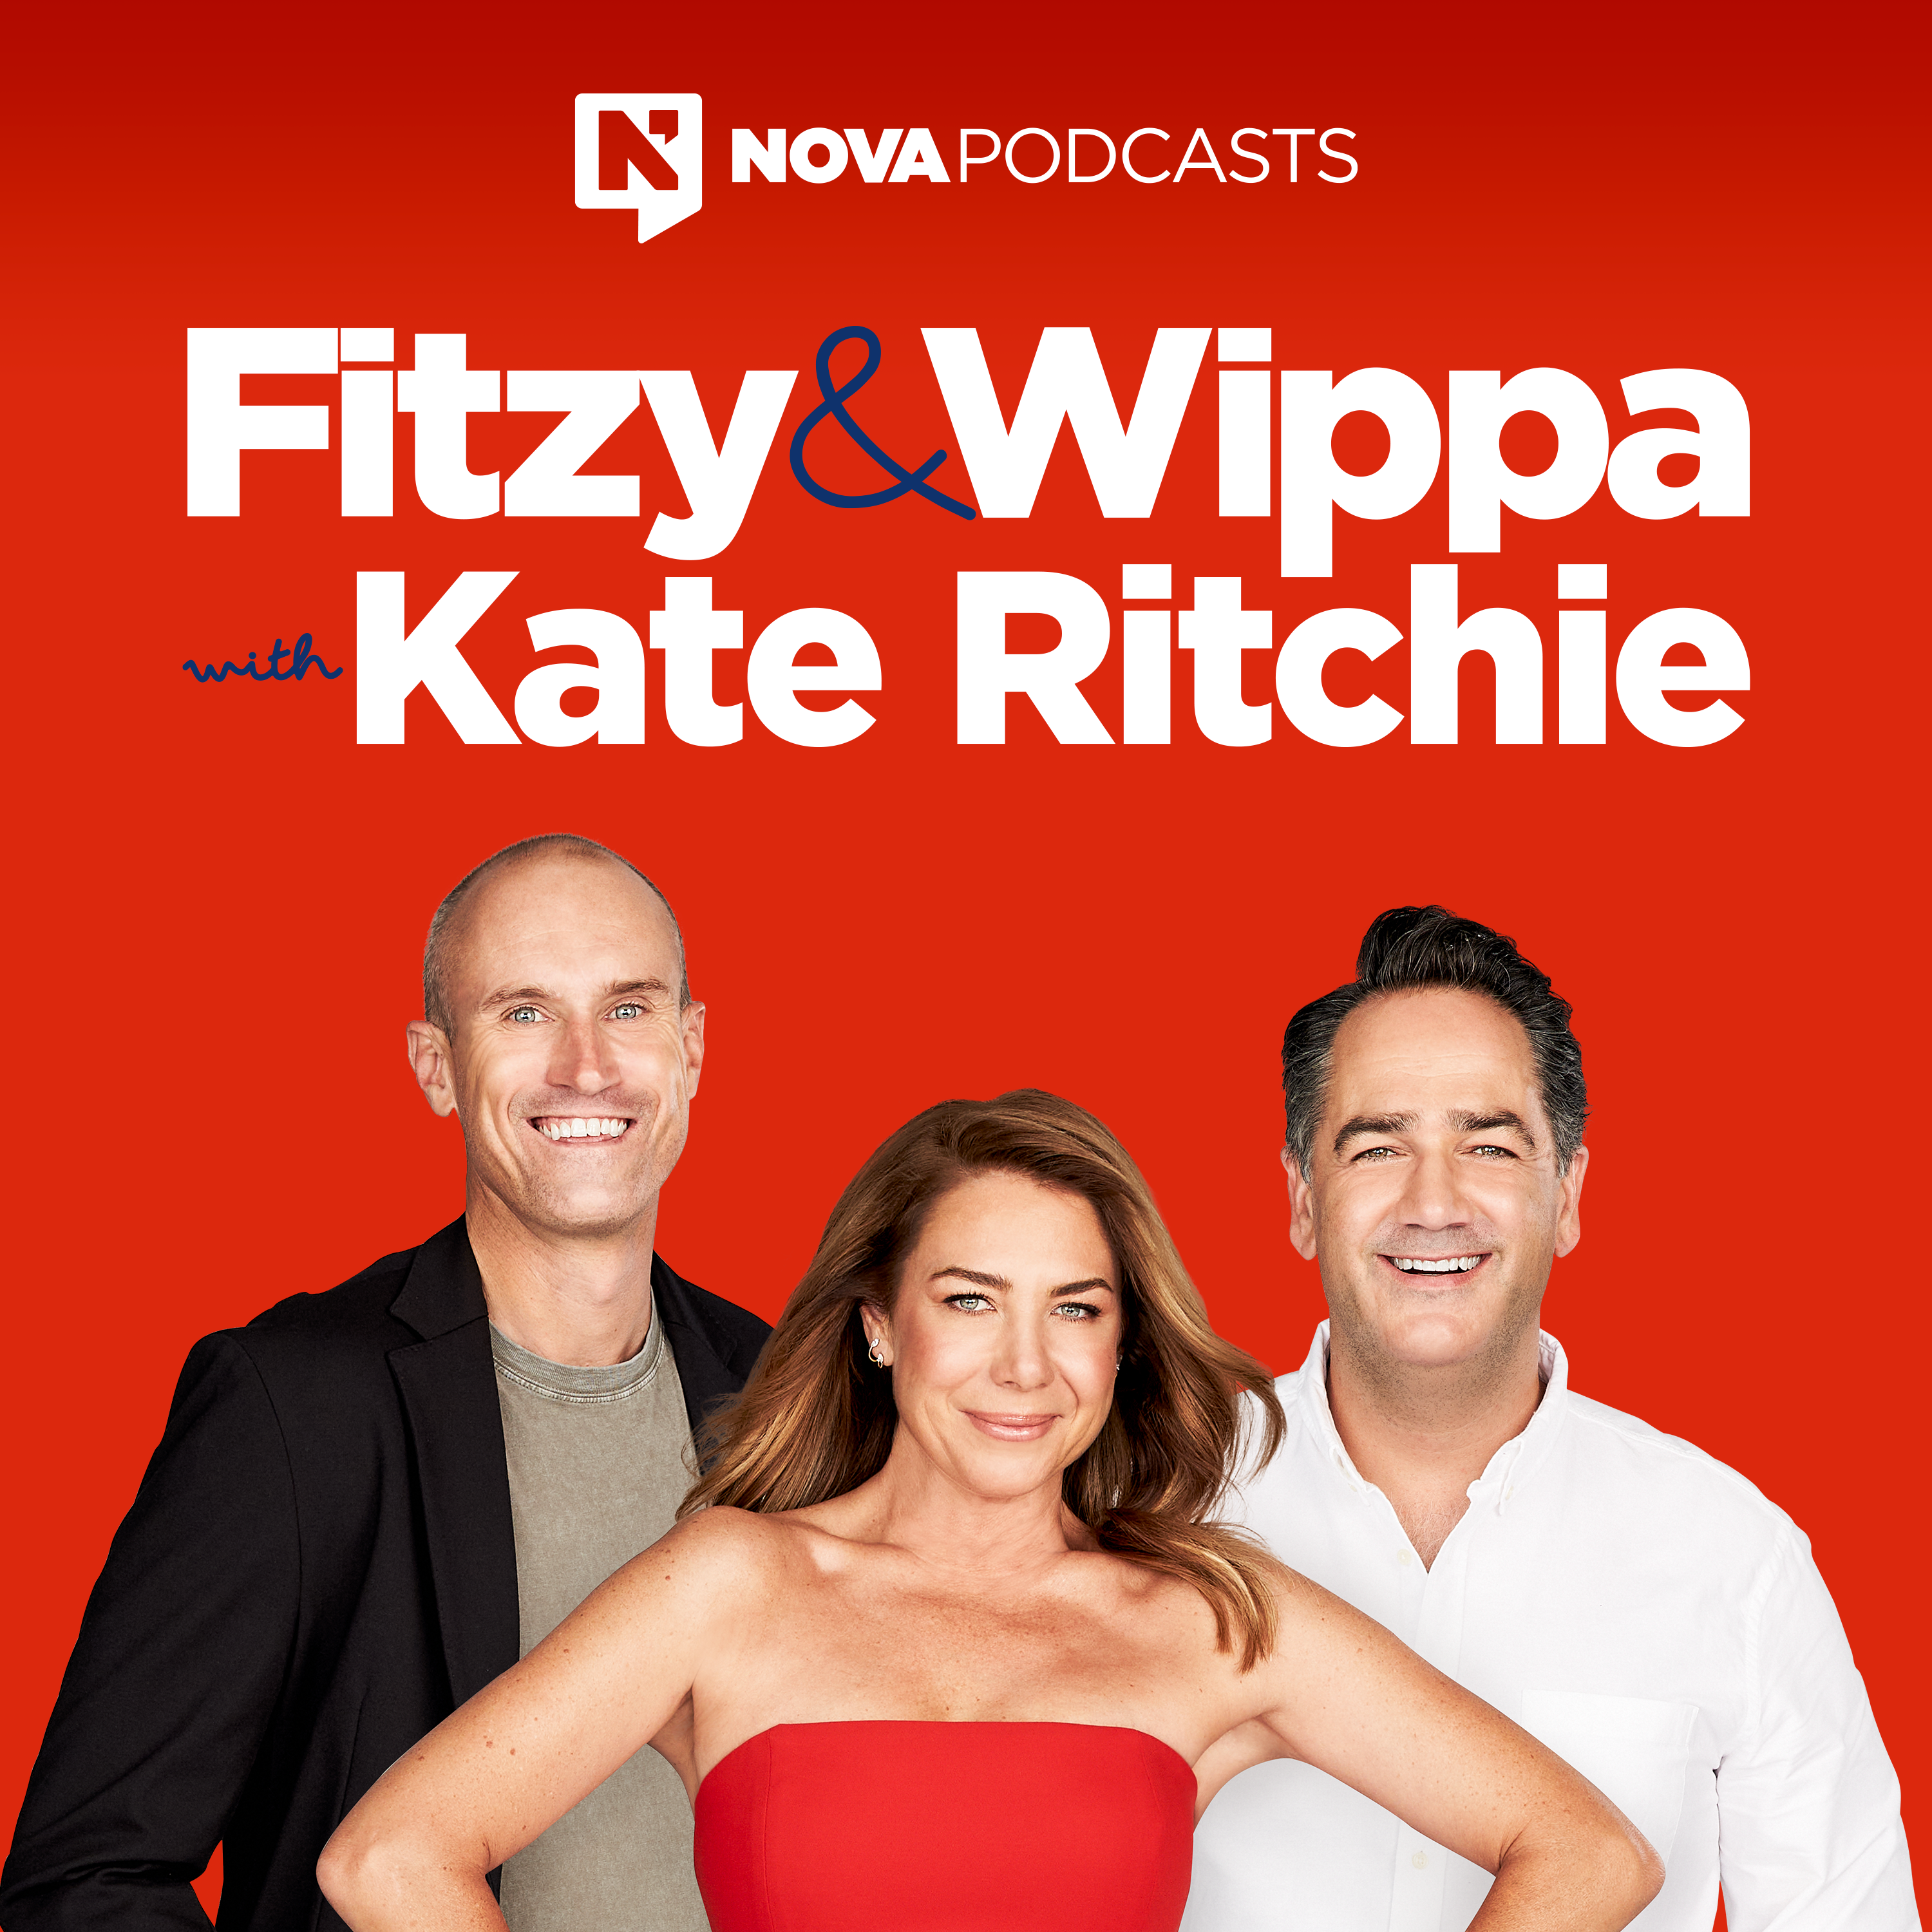 CATCH UP - Fitzy discovered a way for Wippa to lose his double chin